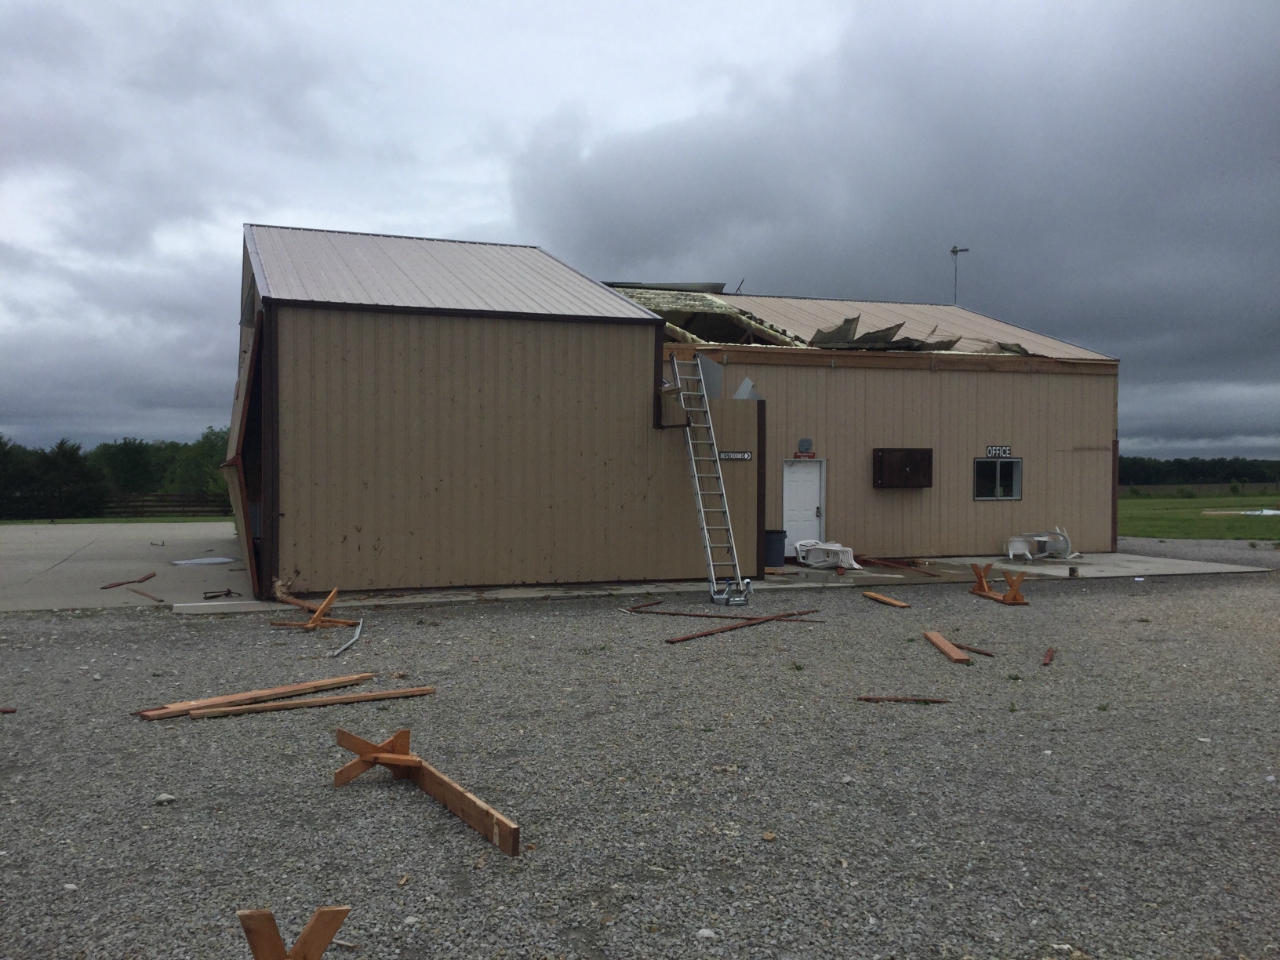 Photo of Damage to hanger building with roof panels removed and window/door blown out.